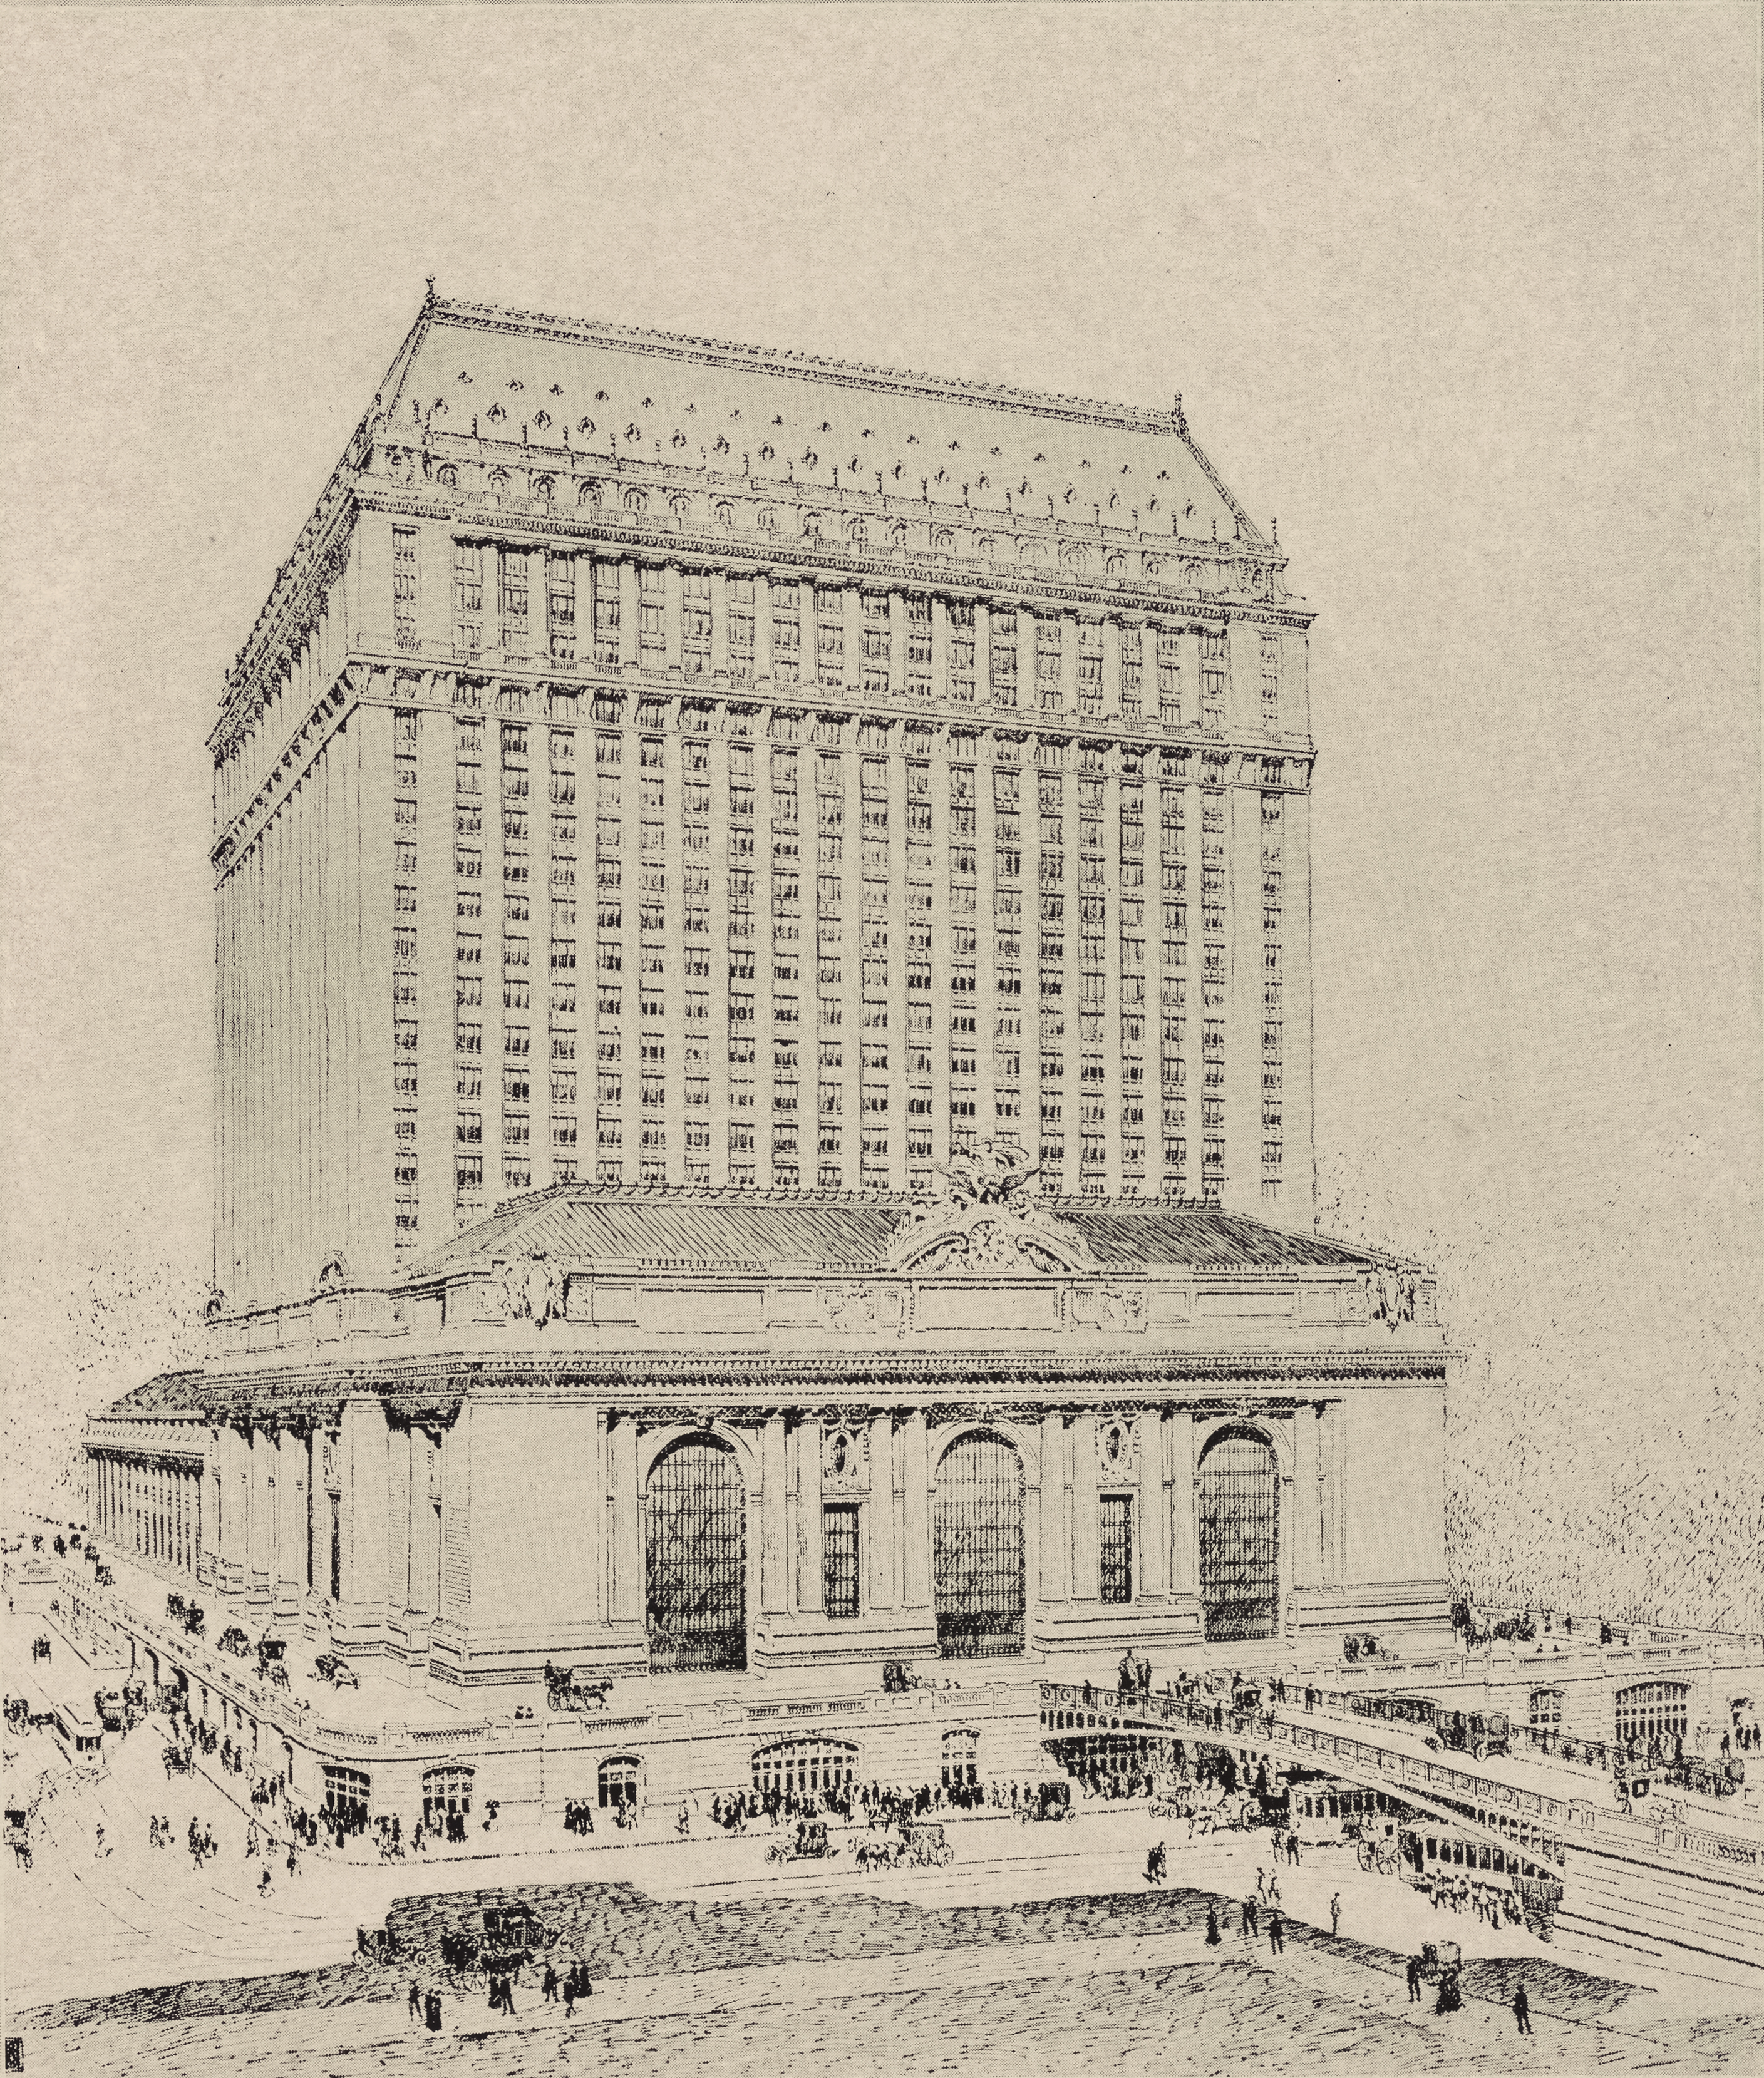 Us architecture. Grand Central Academy of Art. Octagonal Central Tower gif.